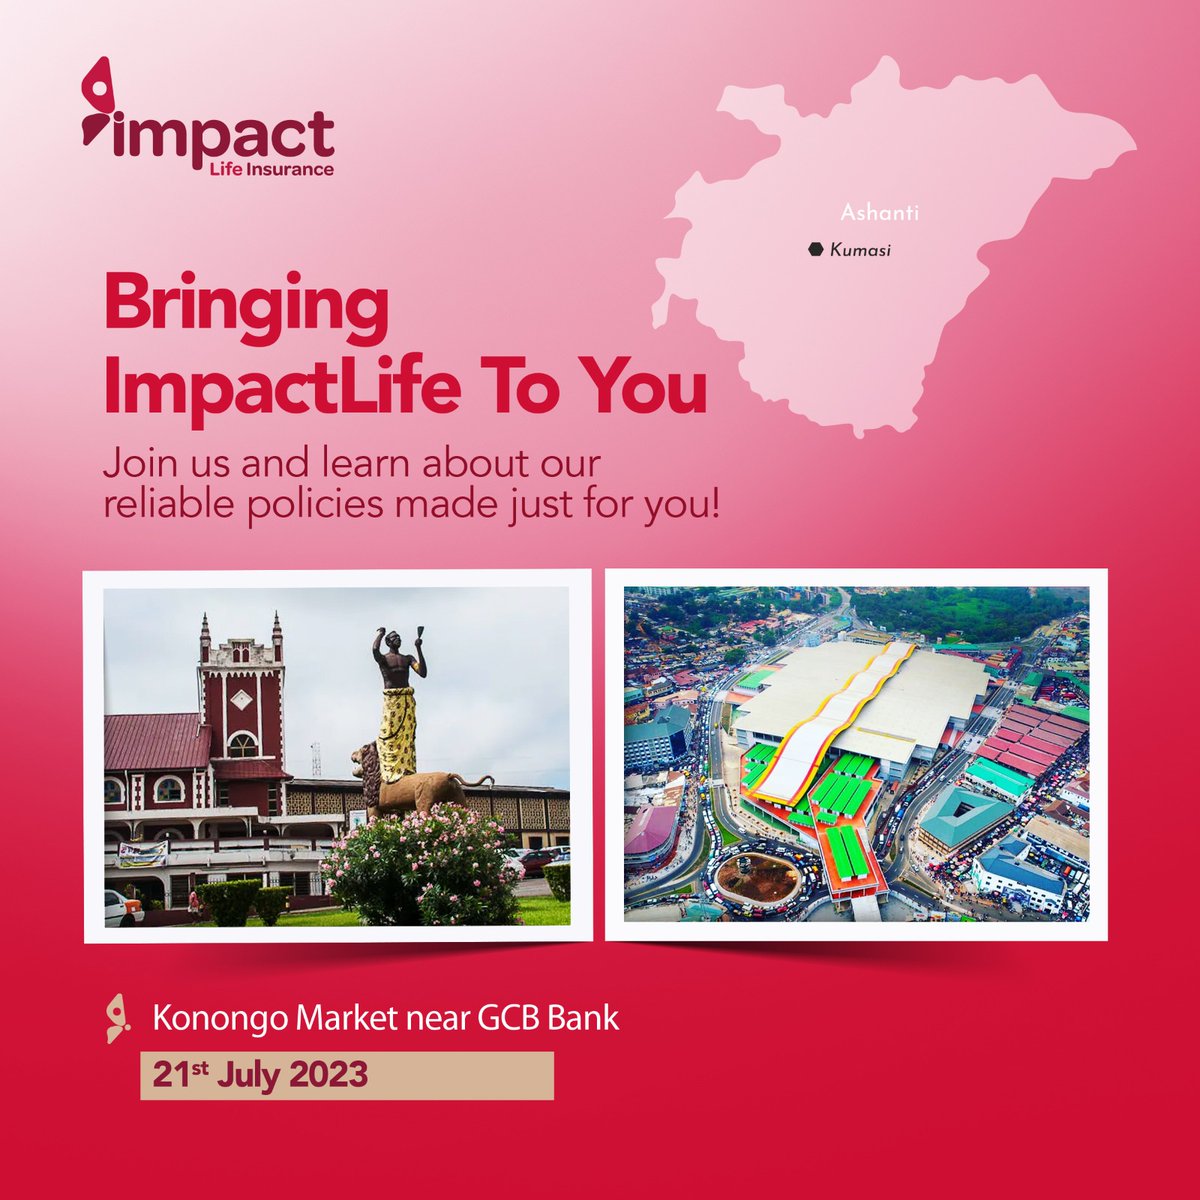 Hello Konongo! We are headed your way today!! It's going to be exciting and Impactful! #impactlife #noworries #hereforyou #heretoinspire